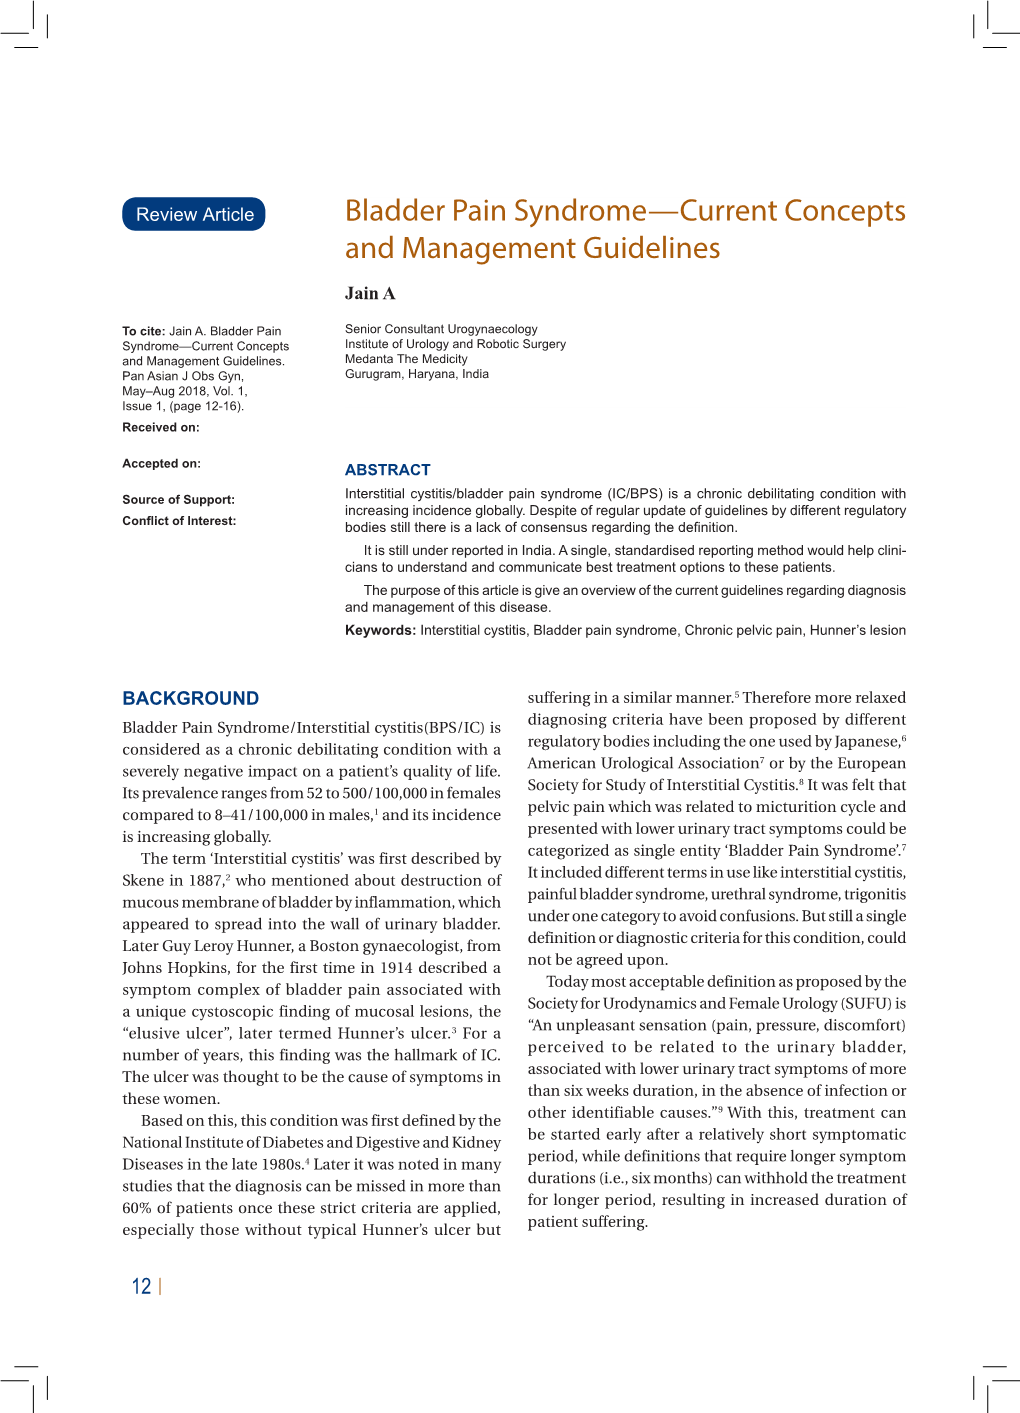 Bladder Pain Syndrome—Current Concepts and Management Guidelines